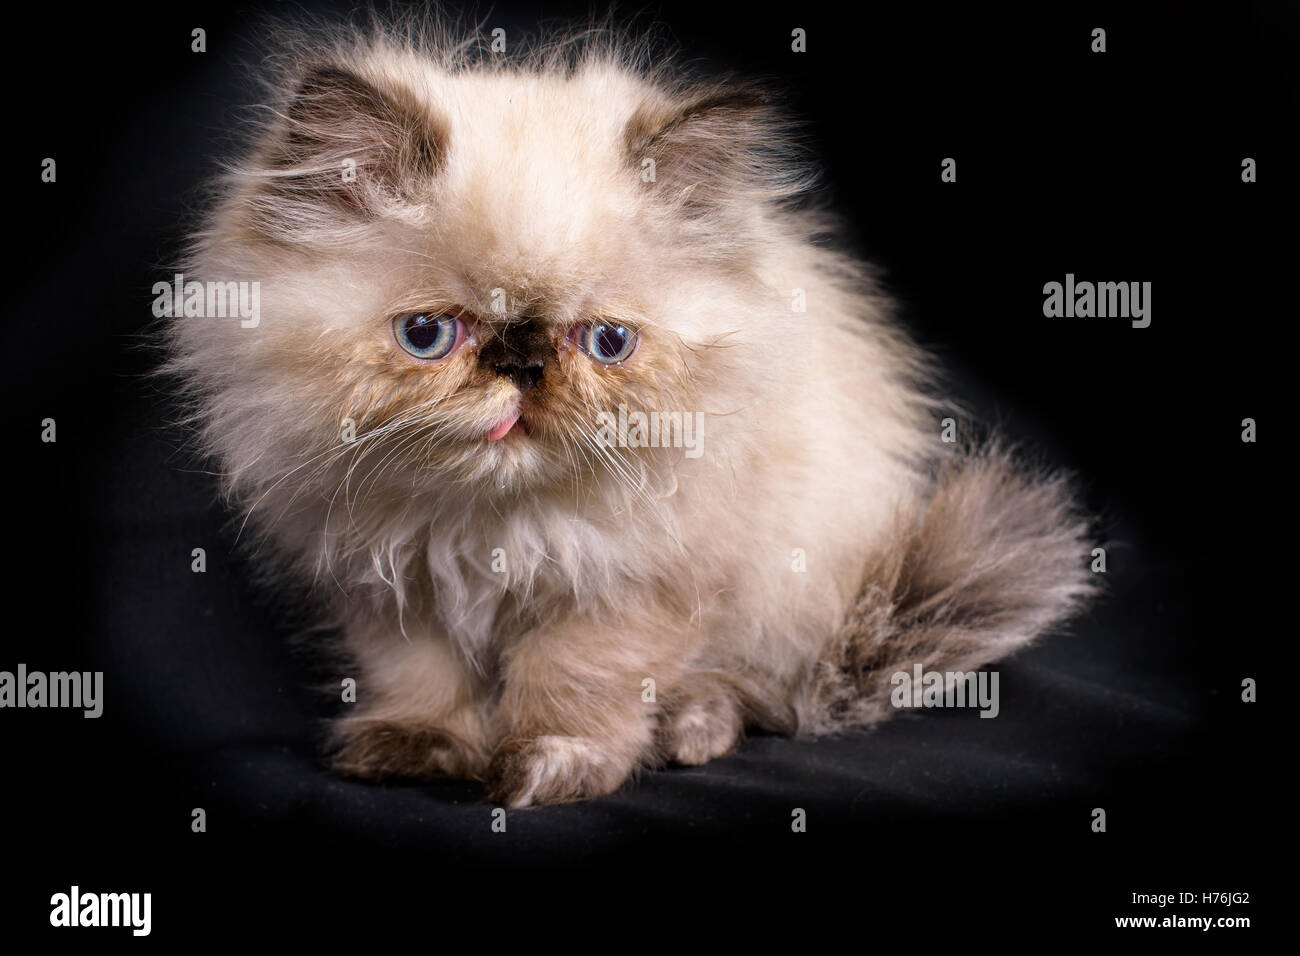 A young, two month old Blue Point Himalayan Persian kitten on a black background Stock Photo